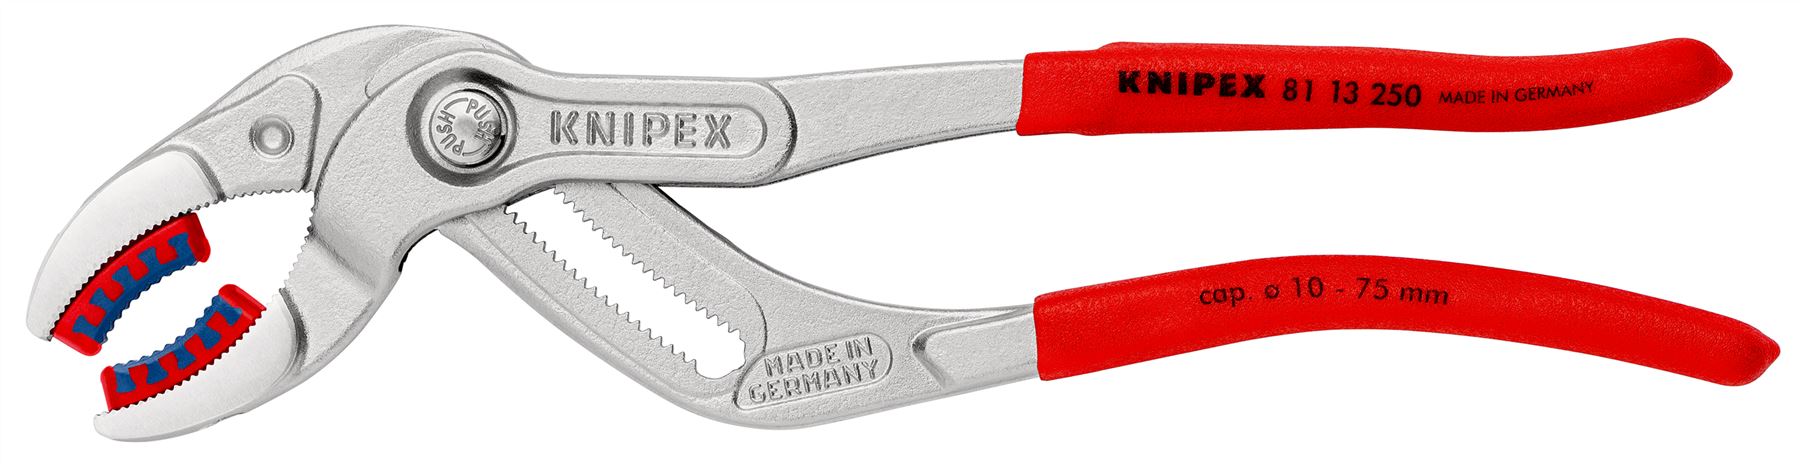 Knipex Siphon and Connector Pliers SpeedGrip Chrome Plated Plastic Jaws 250mm 81 13 250